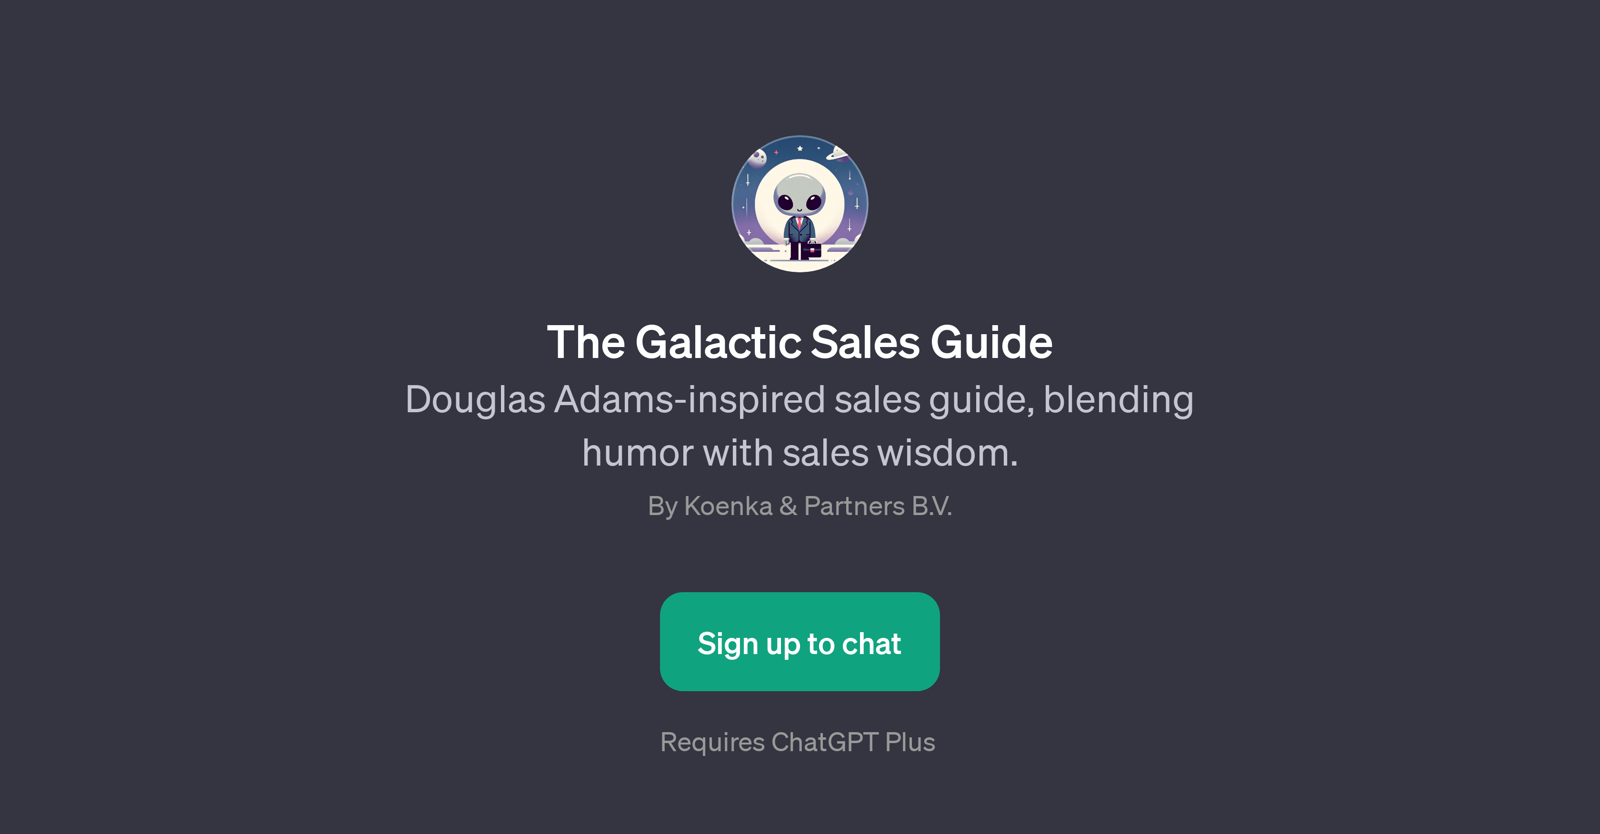 The Galactic Sales Guide website